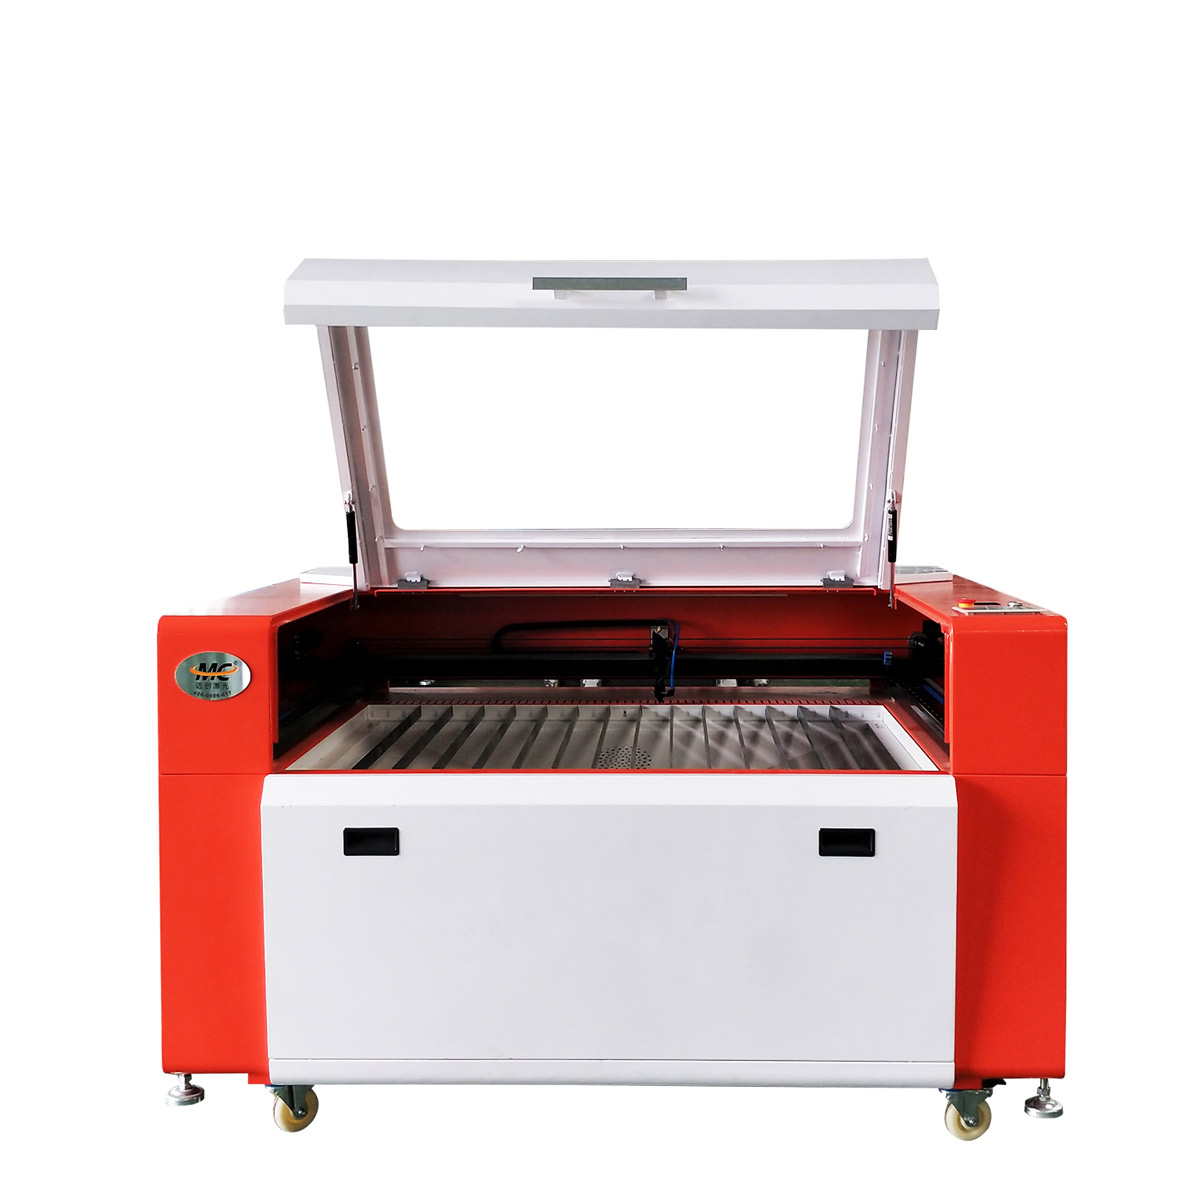 Overview of the Laser Cutting Machines Market